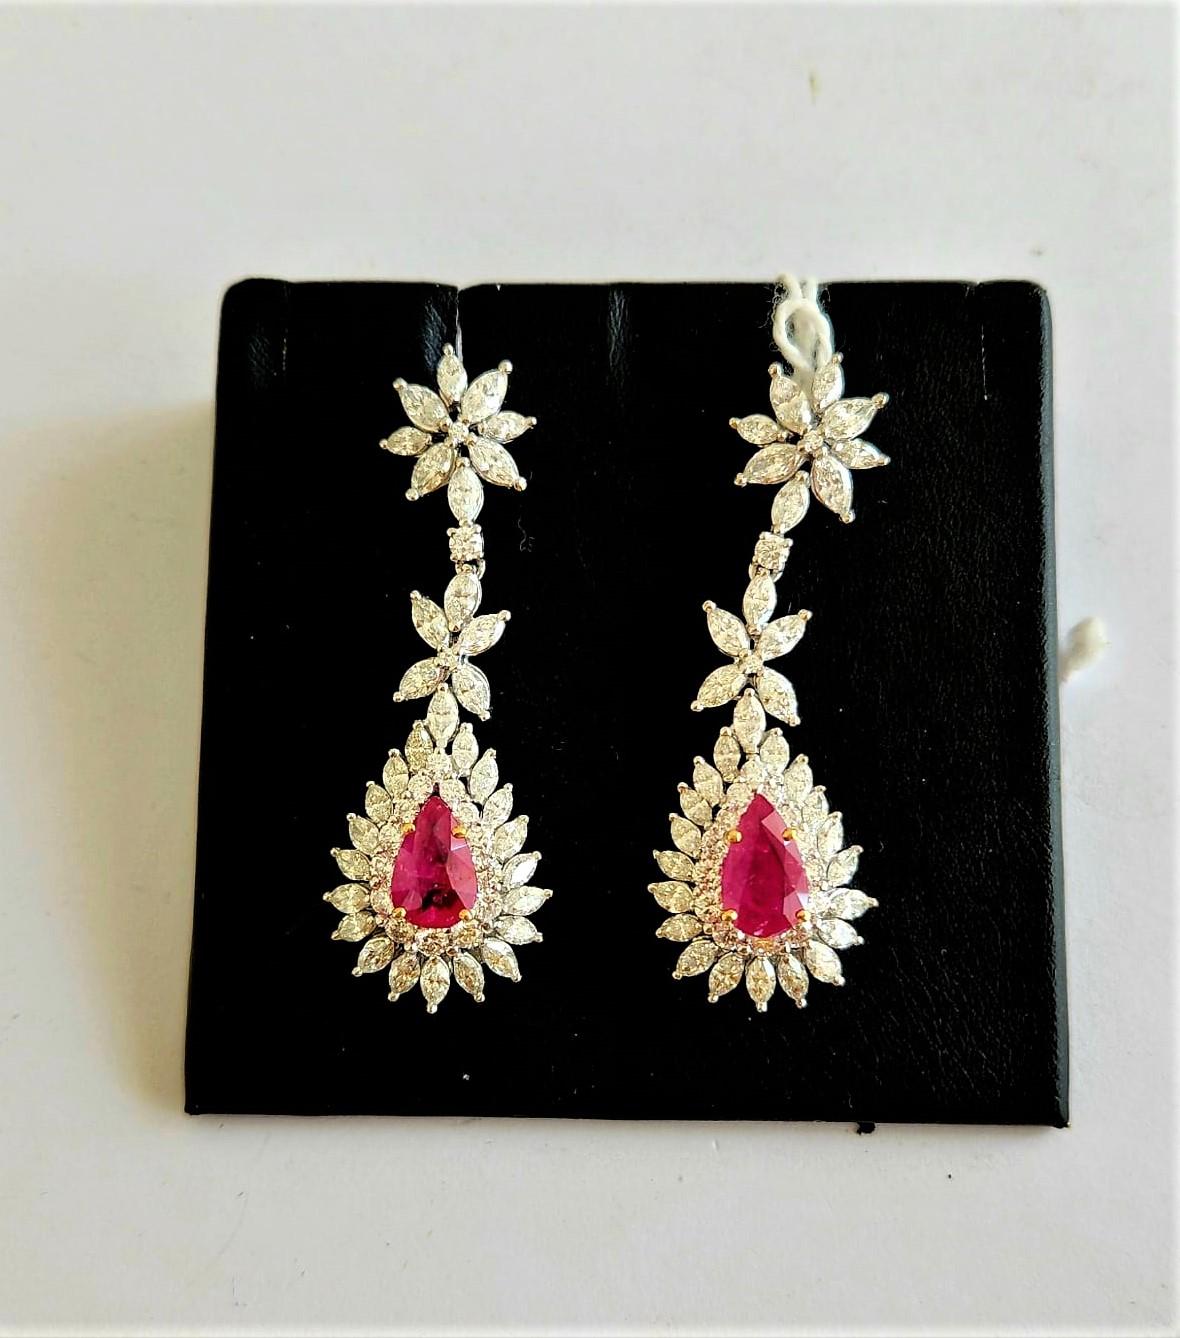 The Following Item we are offering is this Rare Important Radiant 18KT Gold Gorgeous Glittering and Sparkling Magnificent Fancy Ruby and Diamond Dangle Earrings. Earrings contain approx 11CTS of Beautiful Rare Fancy Rubies and Diamonds!!! Stones are